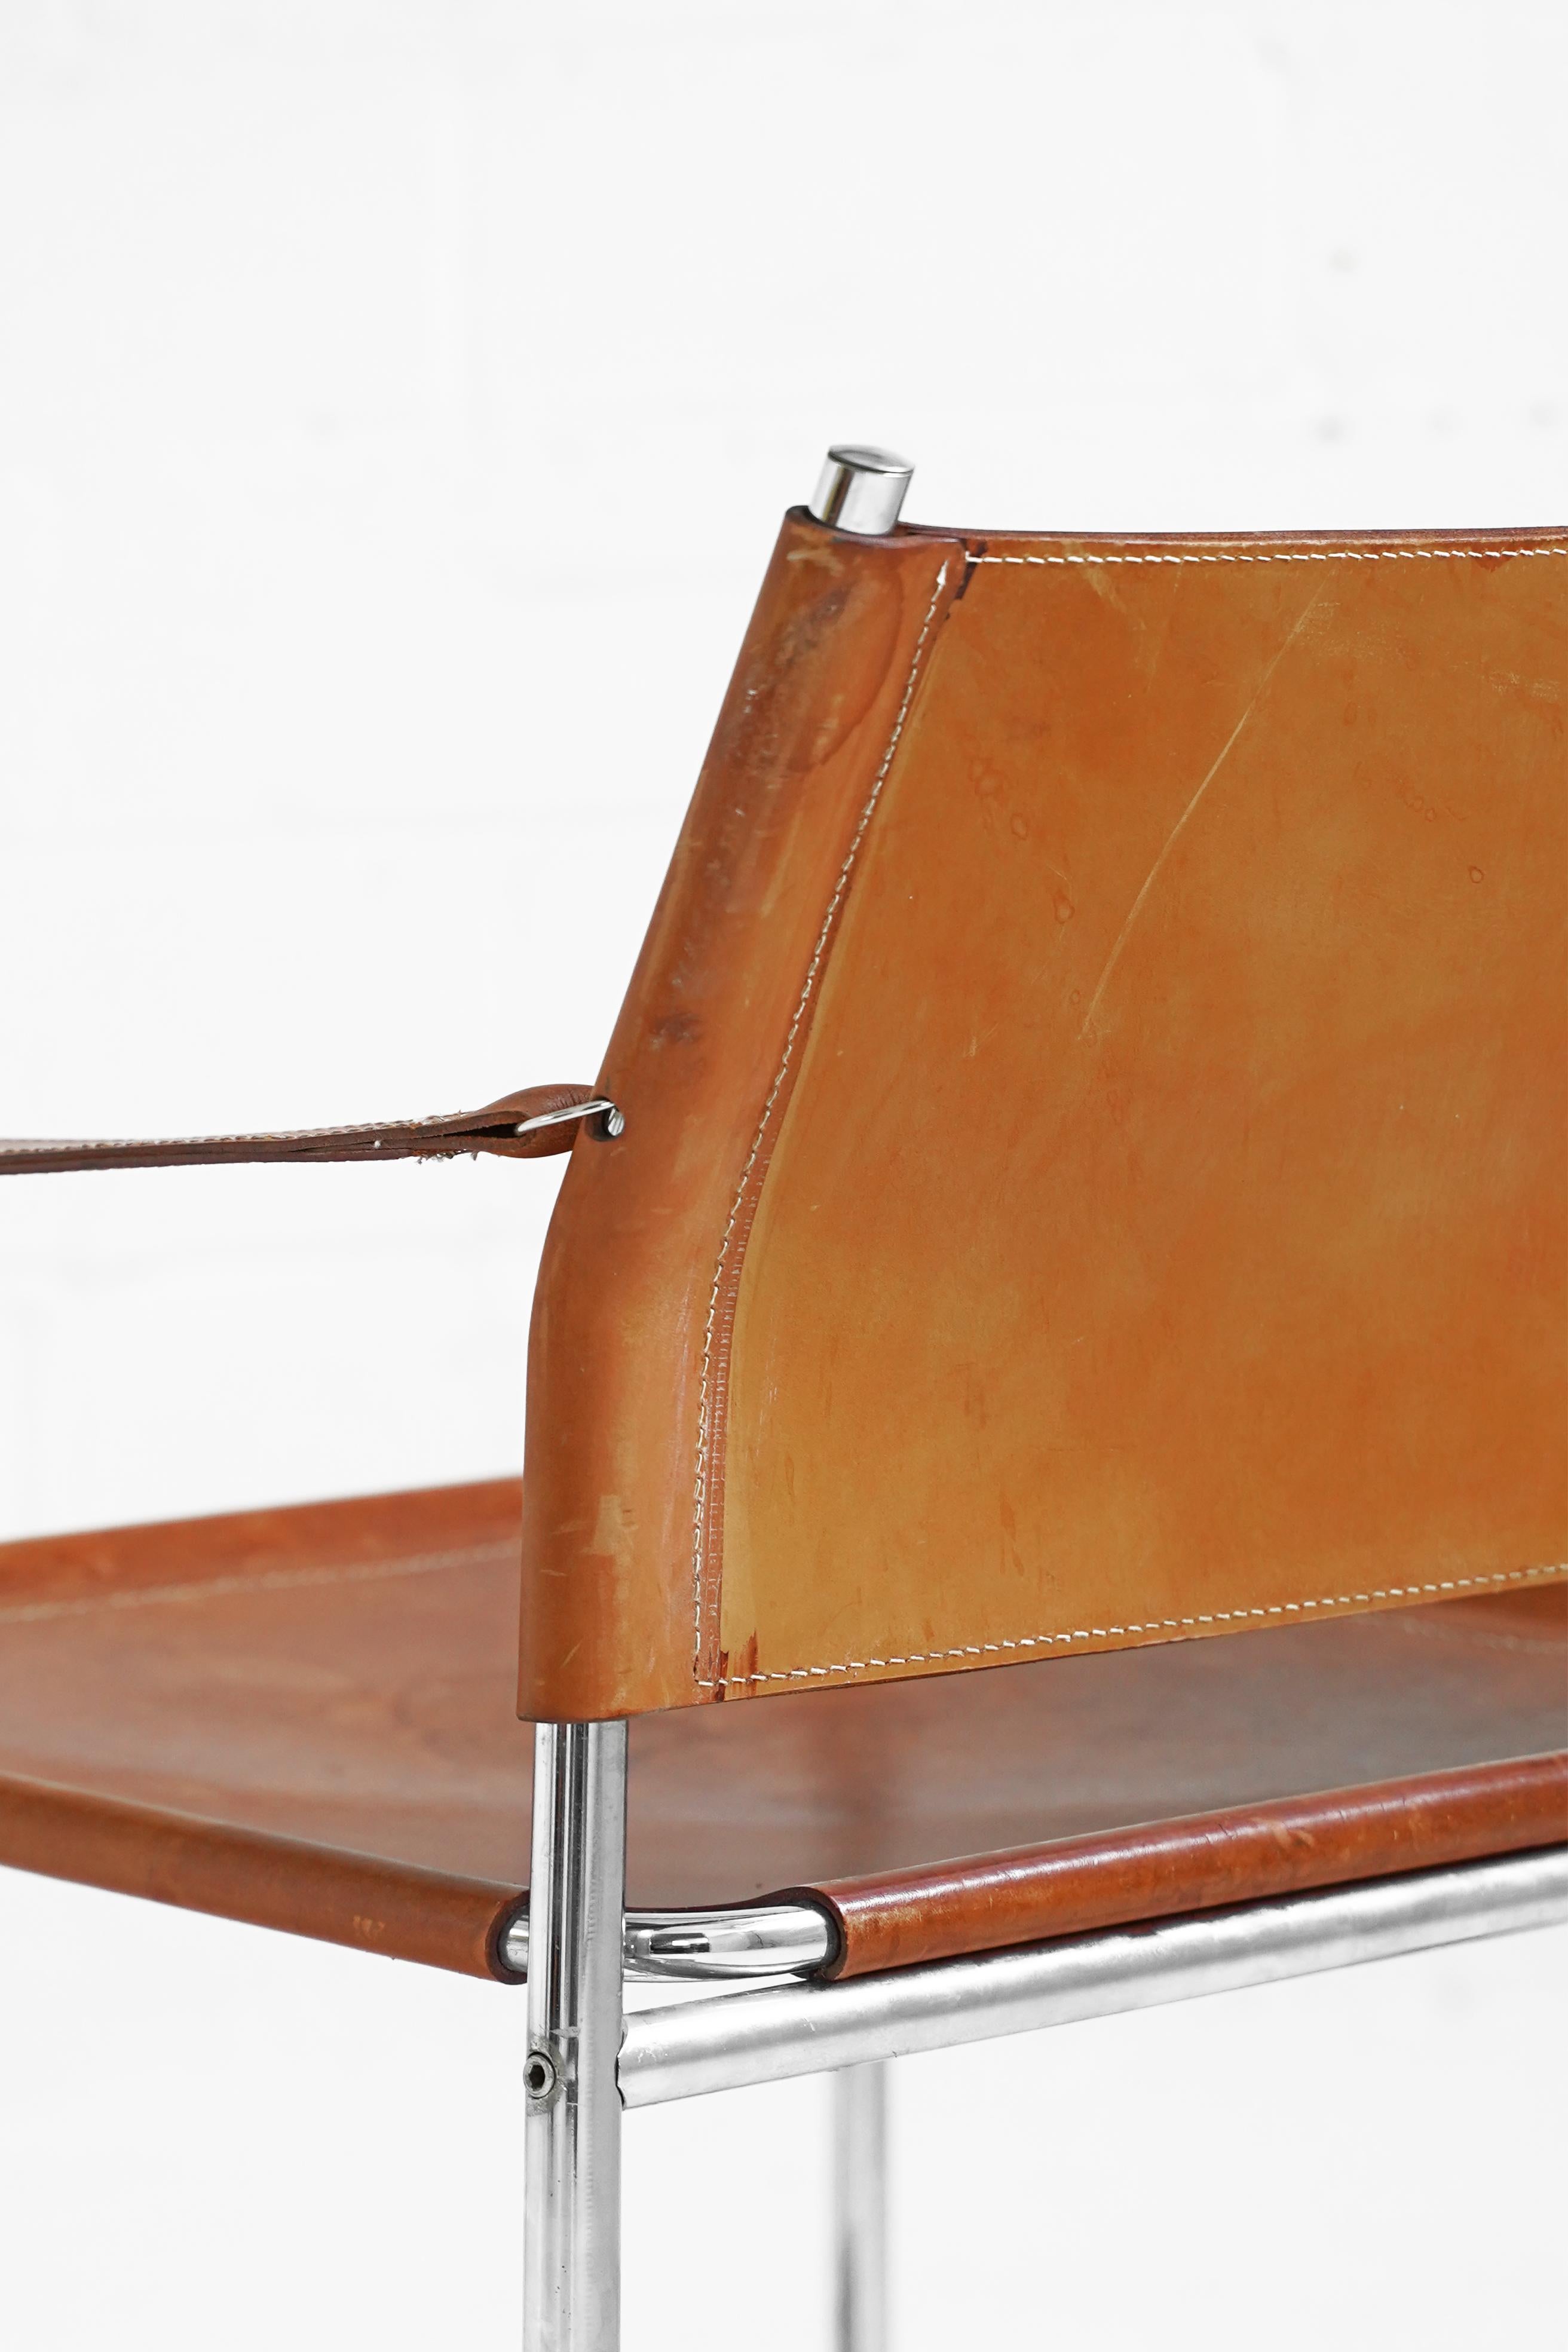 Mid-20th Century Chrome and Leather Amiral Easy Chair by Karin Mobring for IKEA